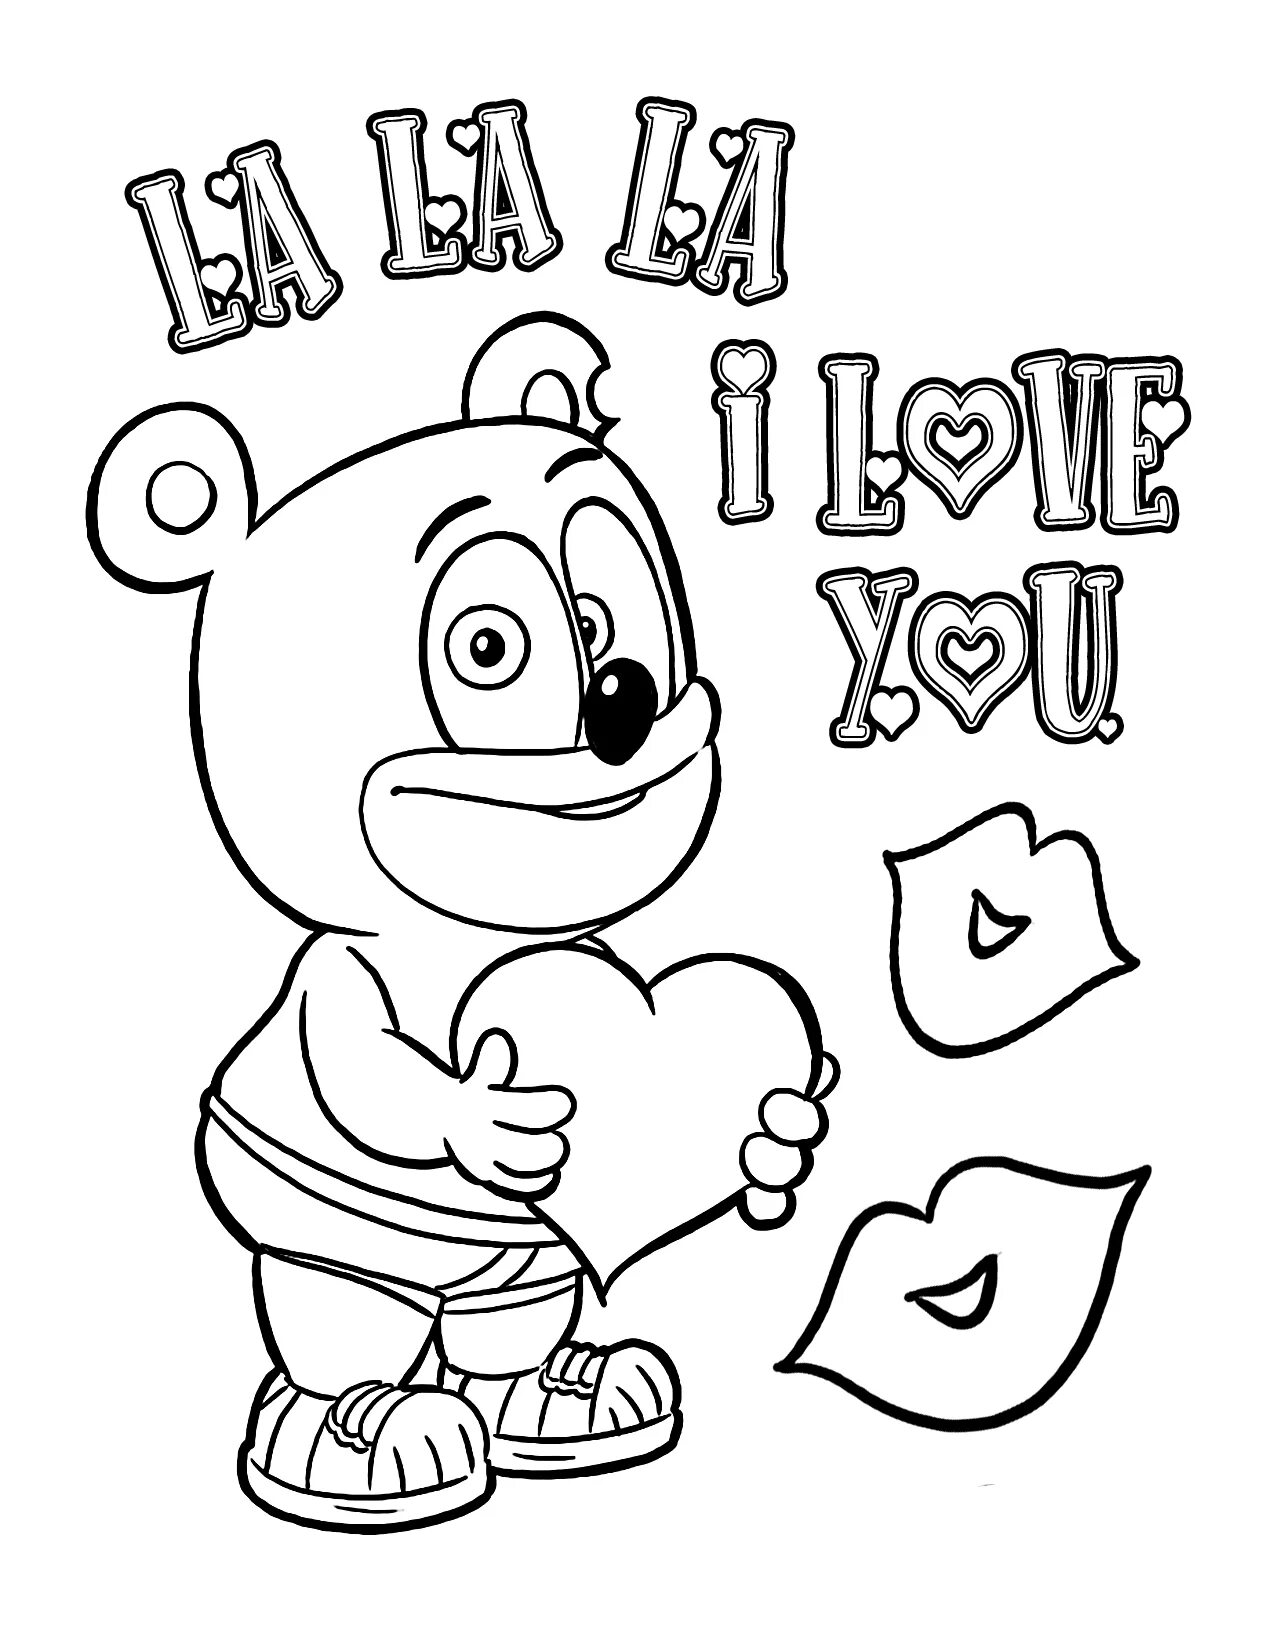 Outrageous gummy bear coloring page